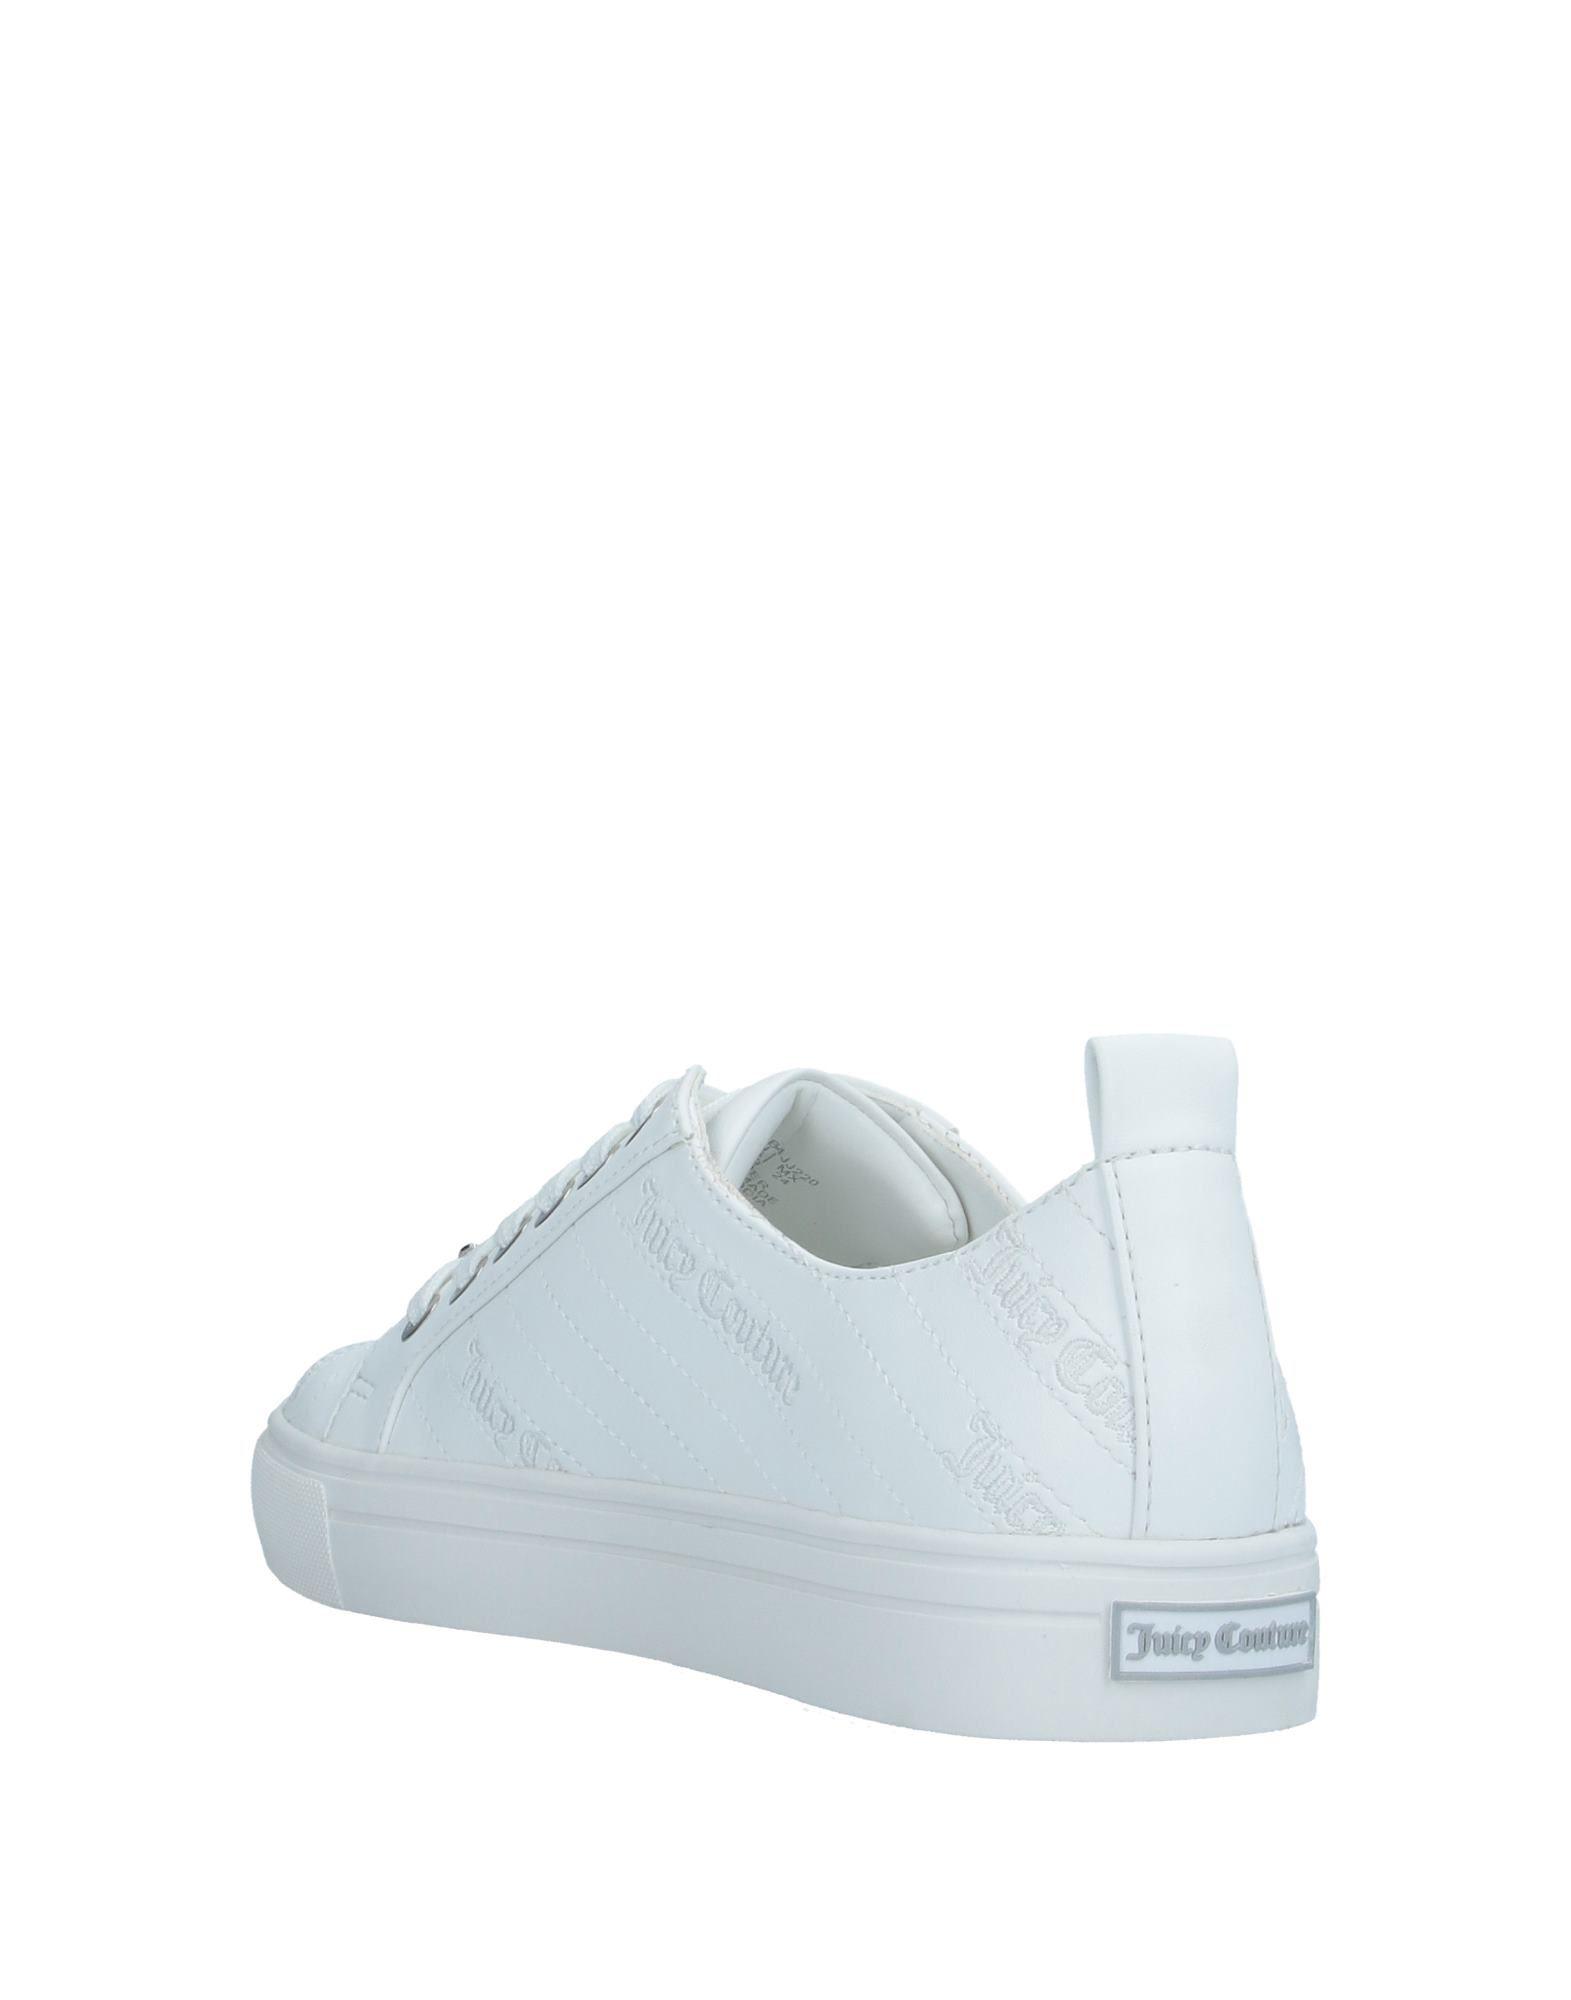 Juicy Couture Girls Beverly Blvd White Rainbow Sneakers | eBay